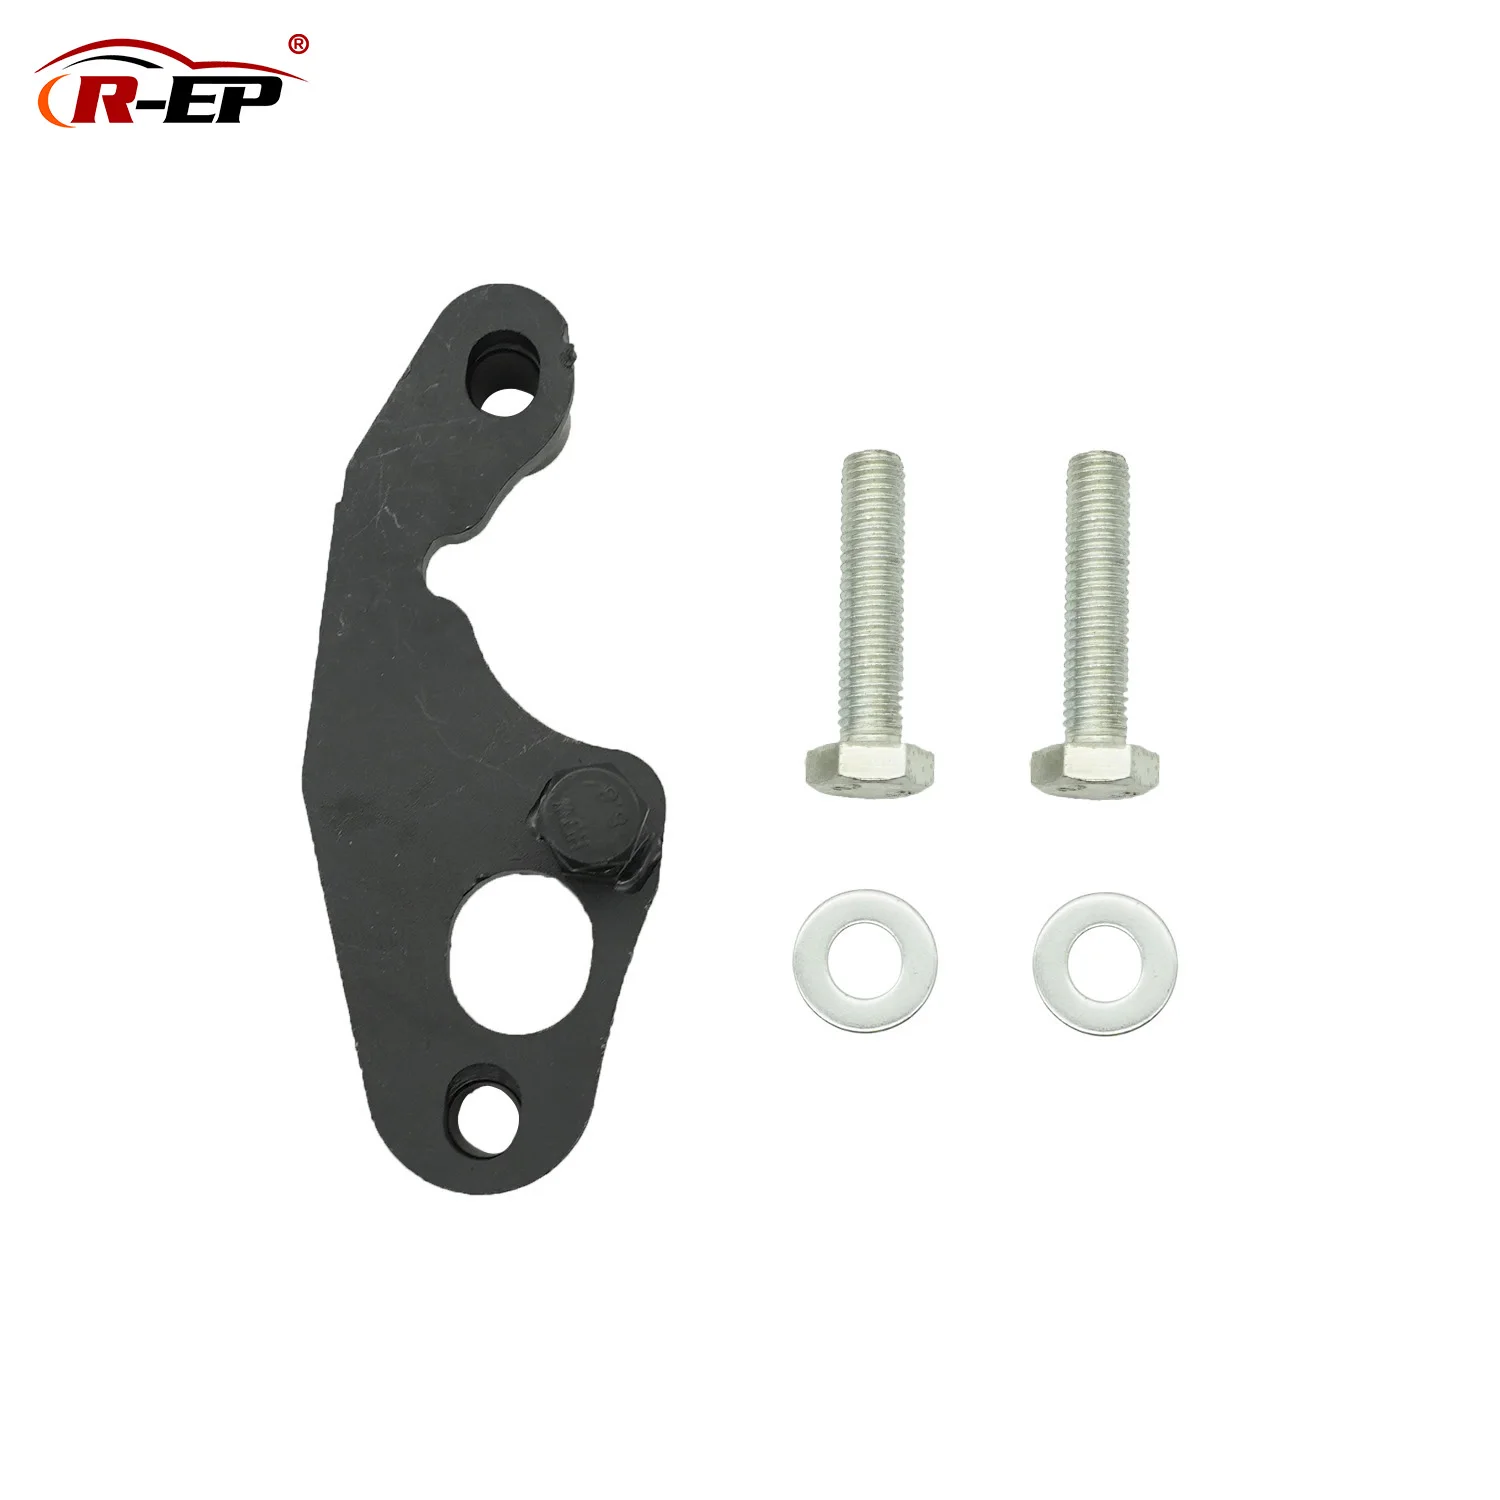 

R-EP Exhaust Manifold Bolt Repair Kit Fits For 1999 and newer GM trucks and SUV with 4.8 5.3, 6.0 or 6.2L engine